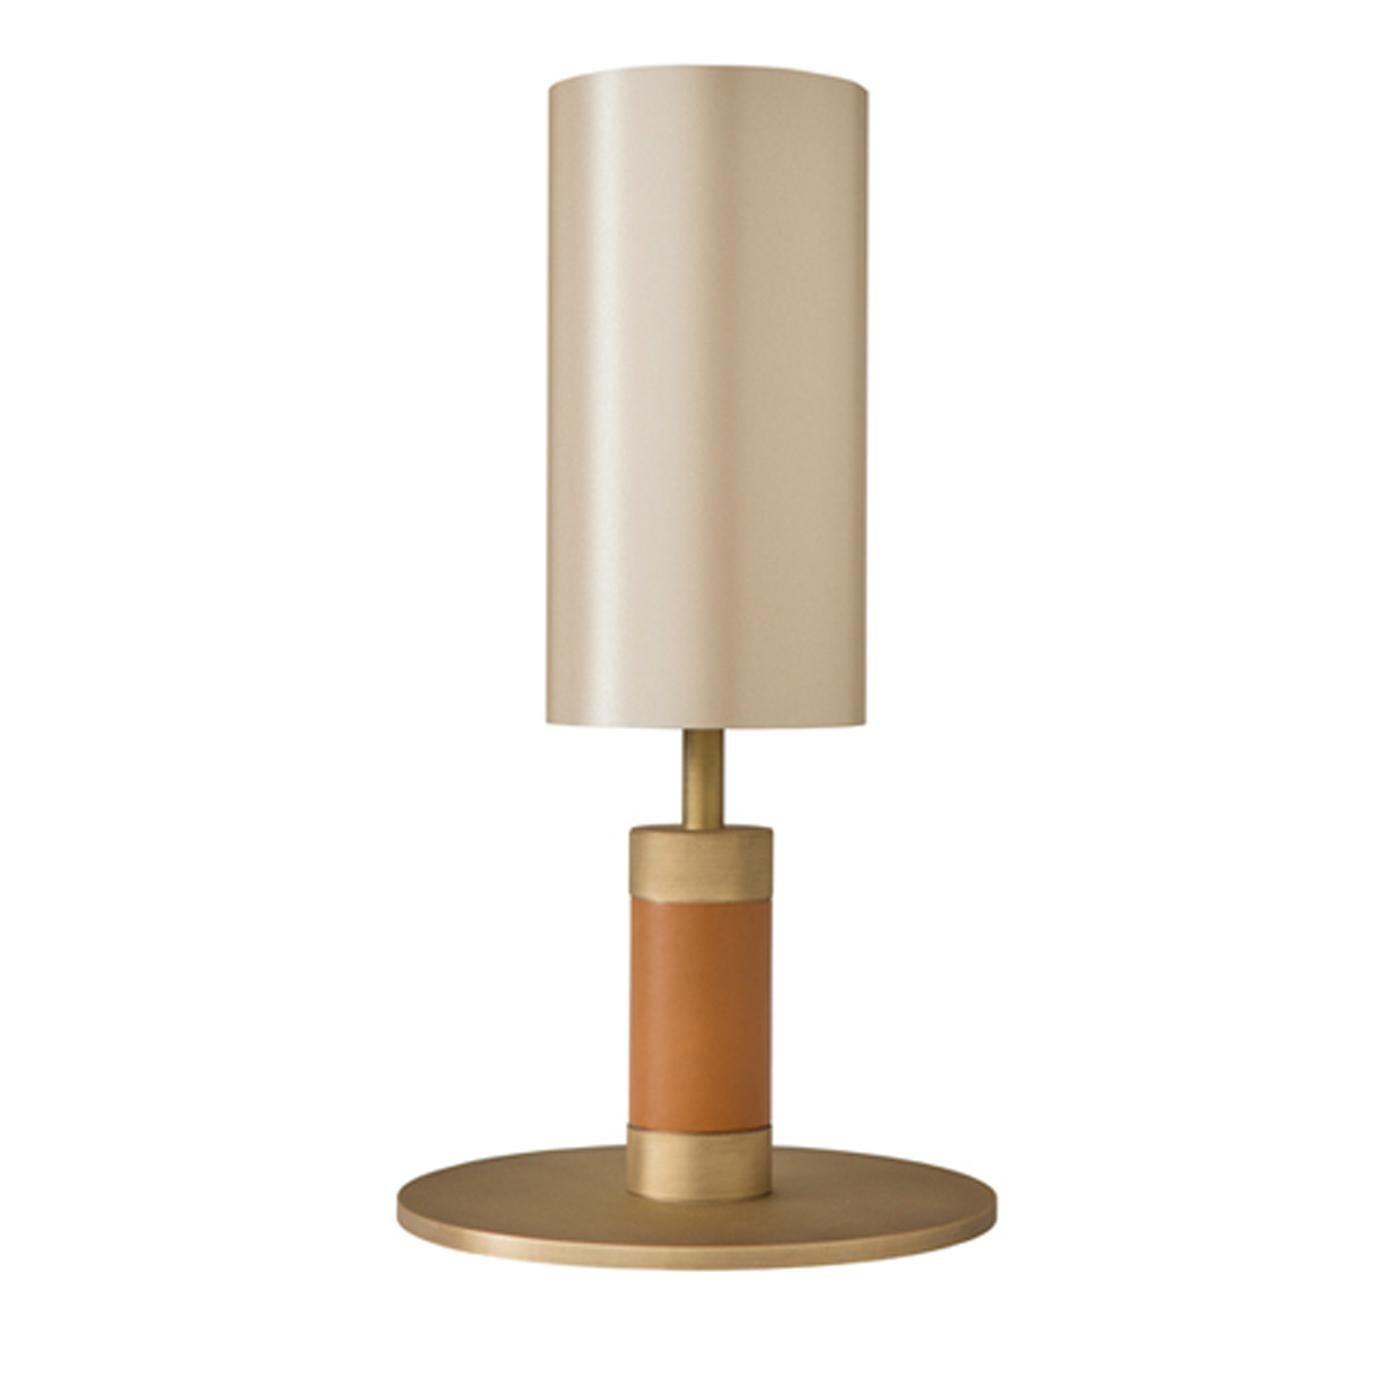 Exuding cozy, clean elegance, the 1.7 bedside table lamp is crafted in brass with a burnished finish and cognac leather and topped with a silk-effect shade. Perfect for warming up a Minimalist bedroom, the lamp comes from a complete collection of